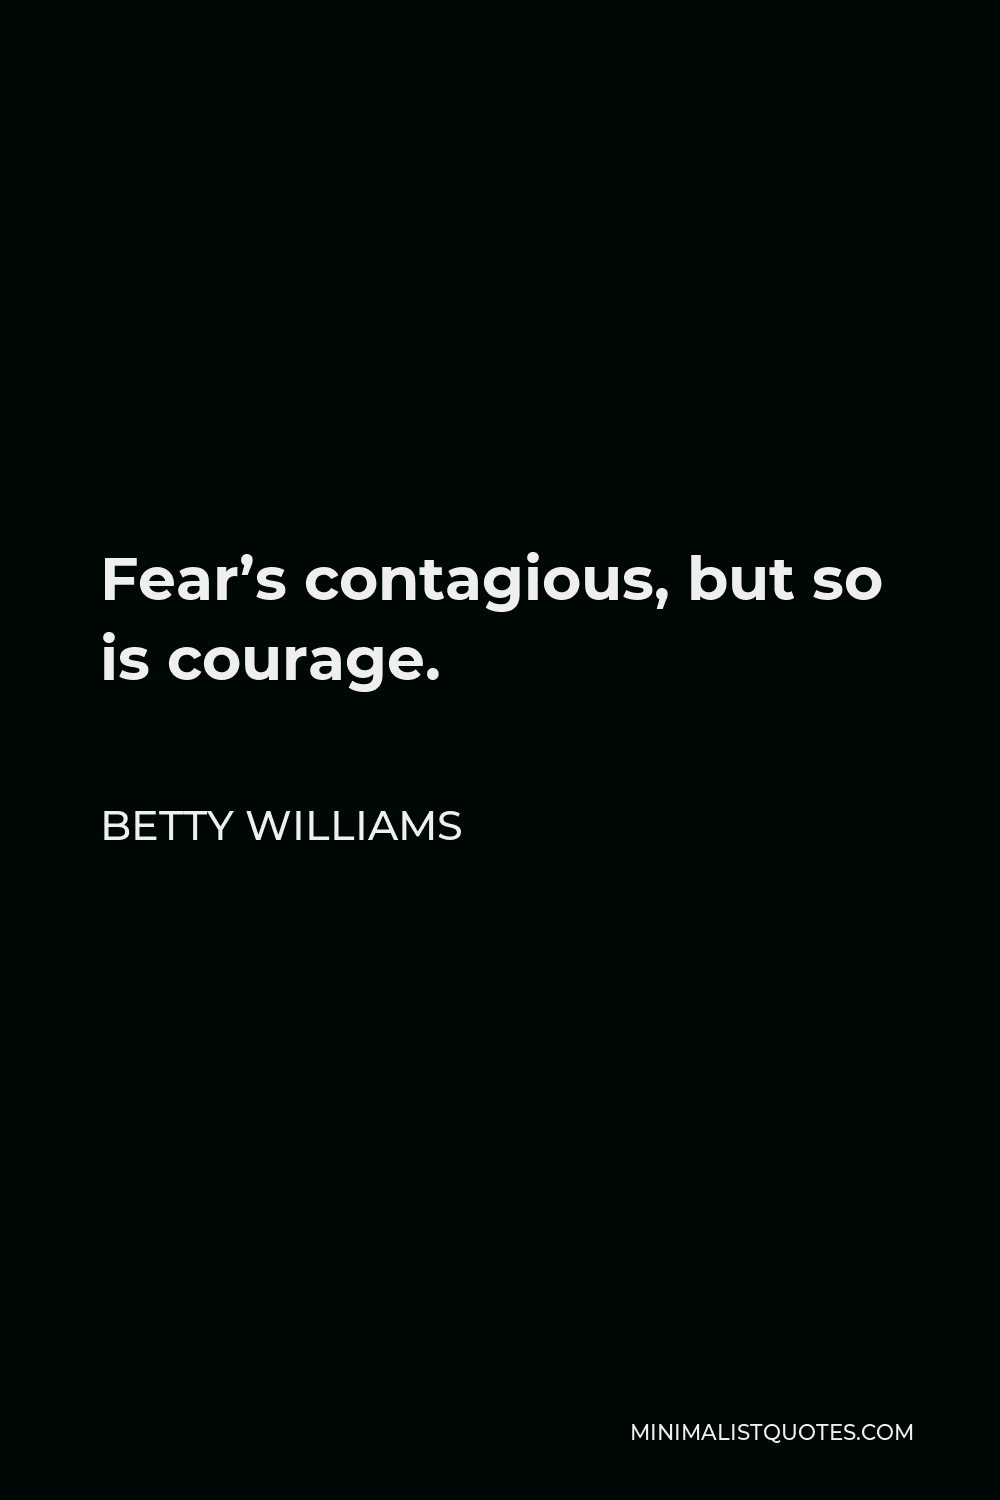 Betty Williams Quote - Fear’s contagious, but so is courage.